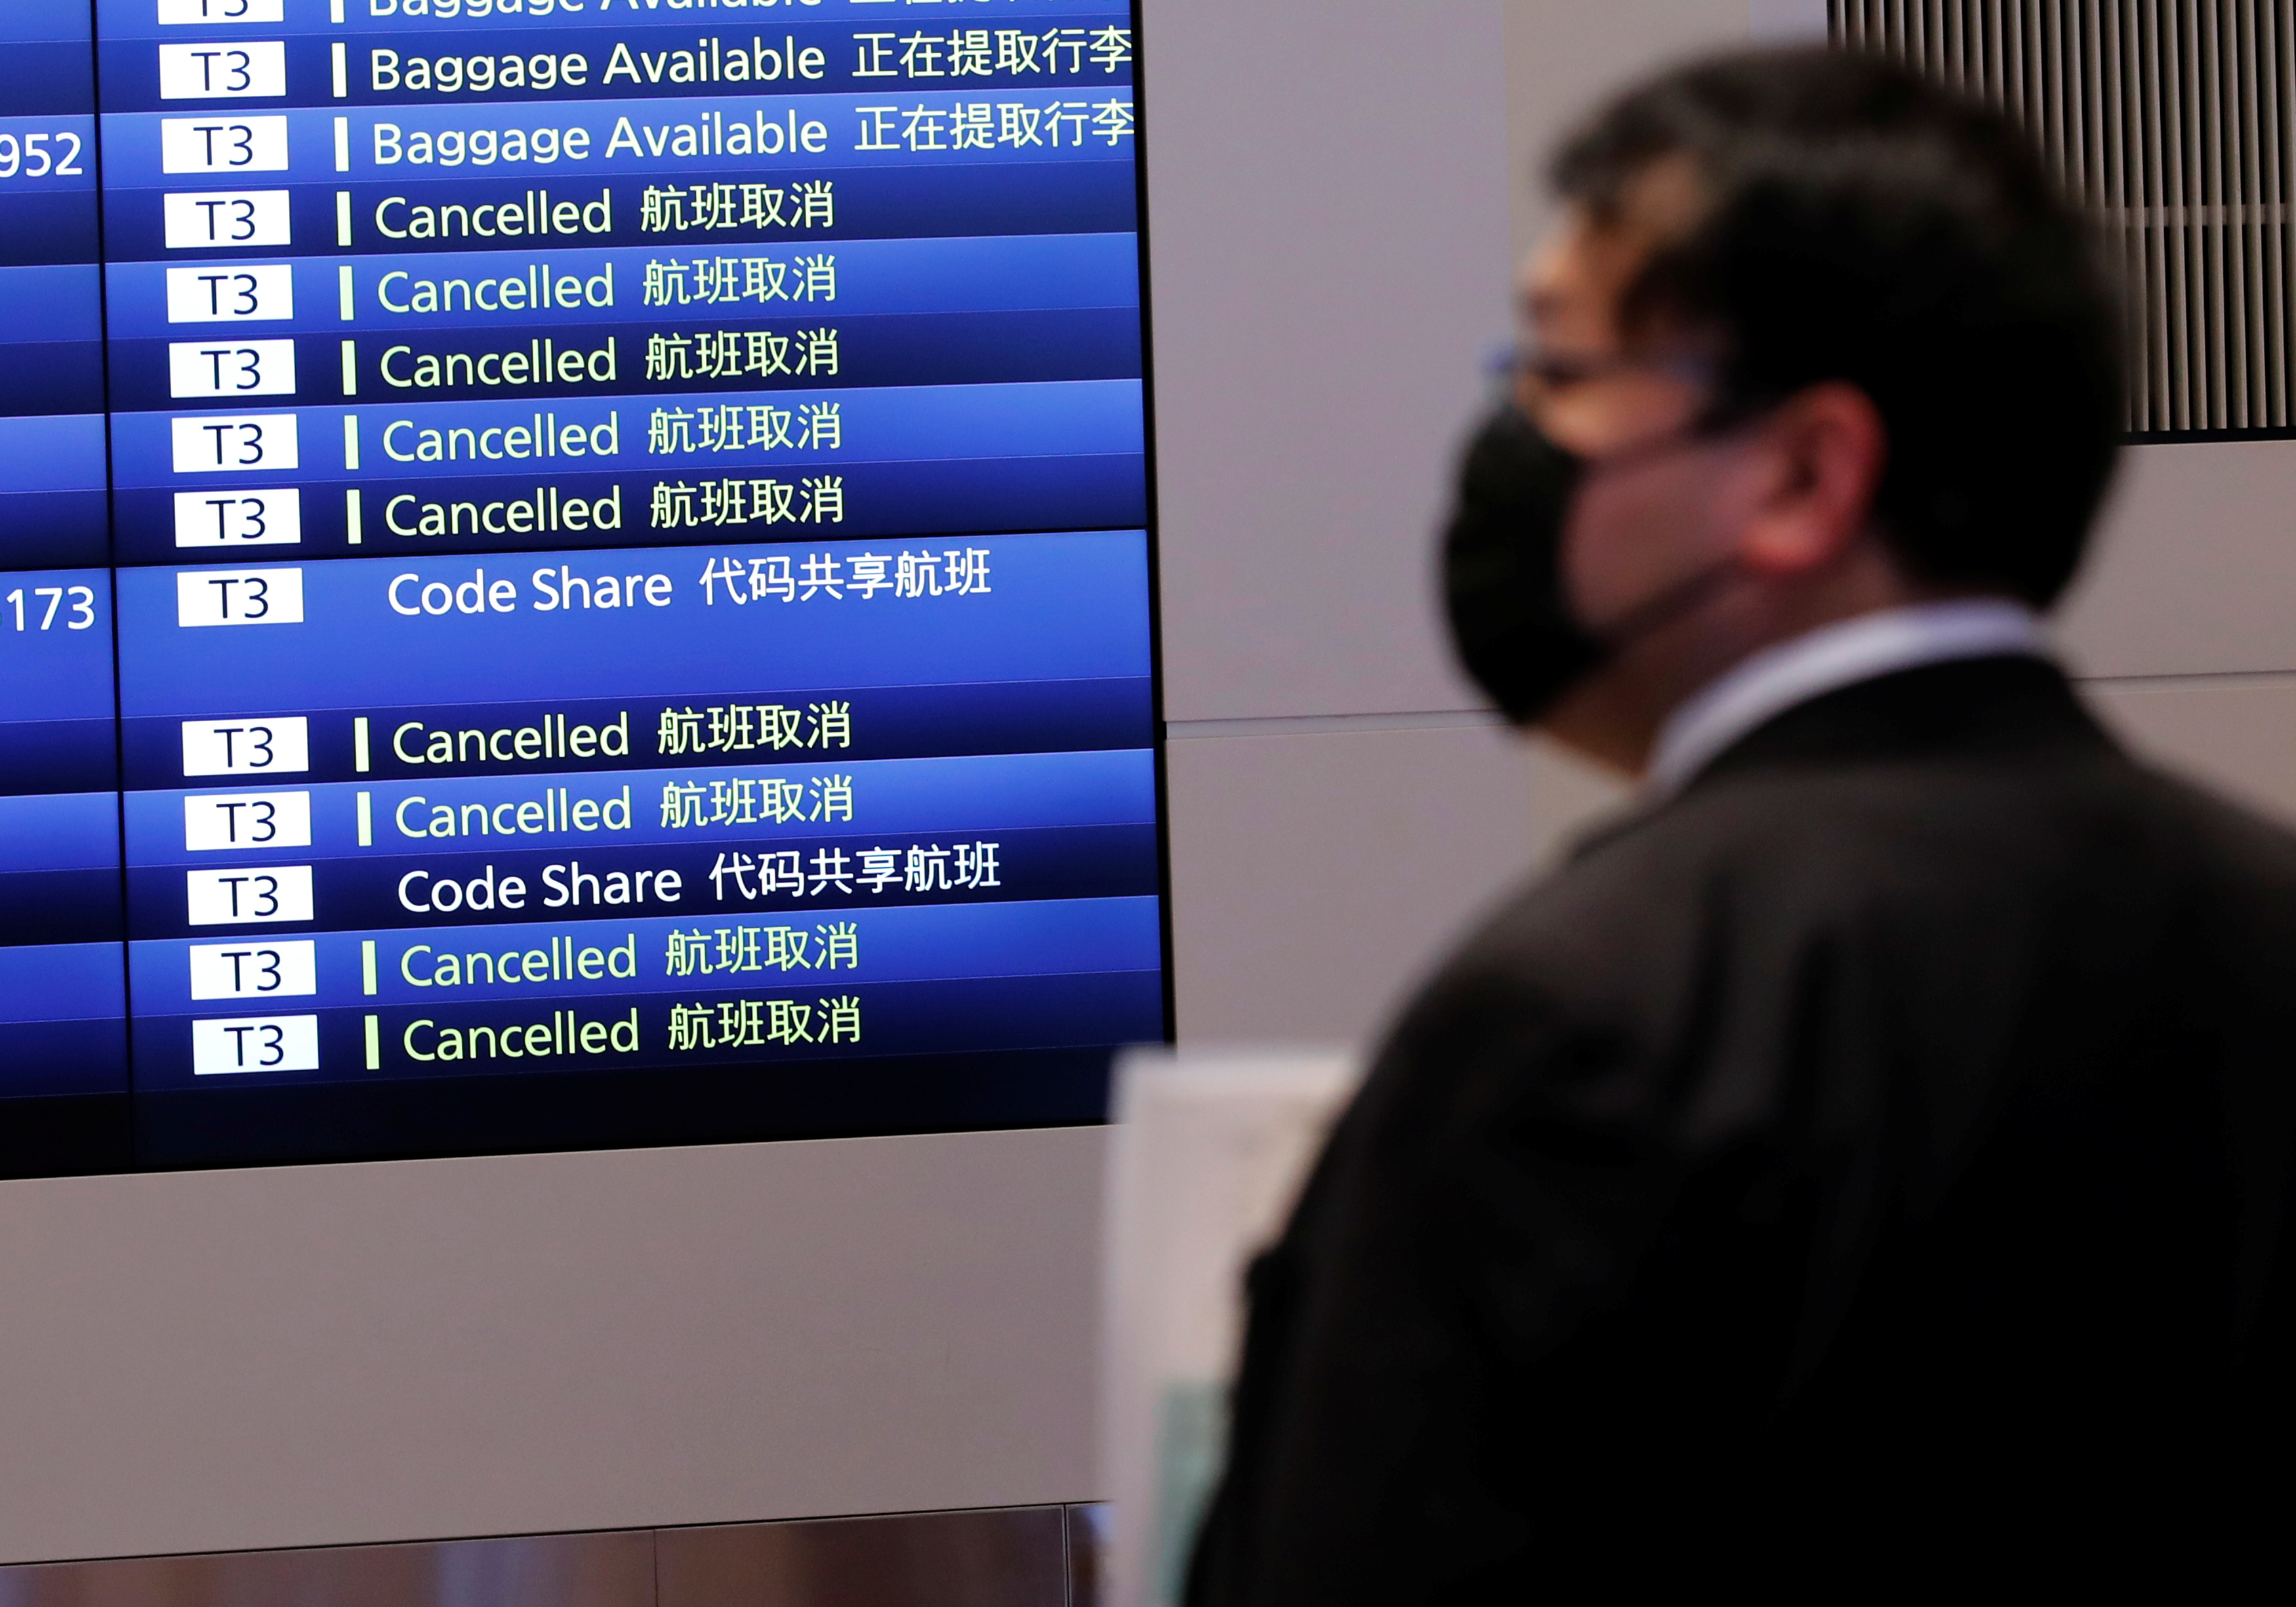 A man stands in front of a monitor showing flight schedules at an arrival hall of Haneda airport's international terminal, amid the coronavirus disease (COVID-19) outbreak, in Tokyo